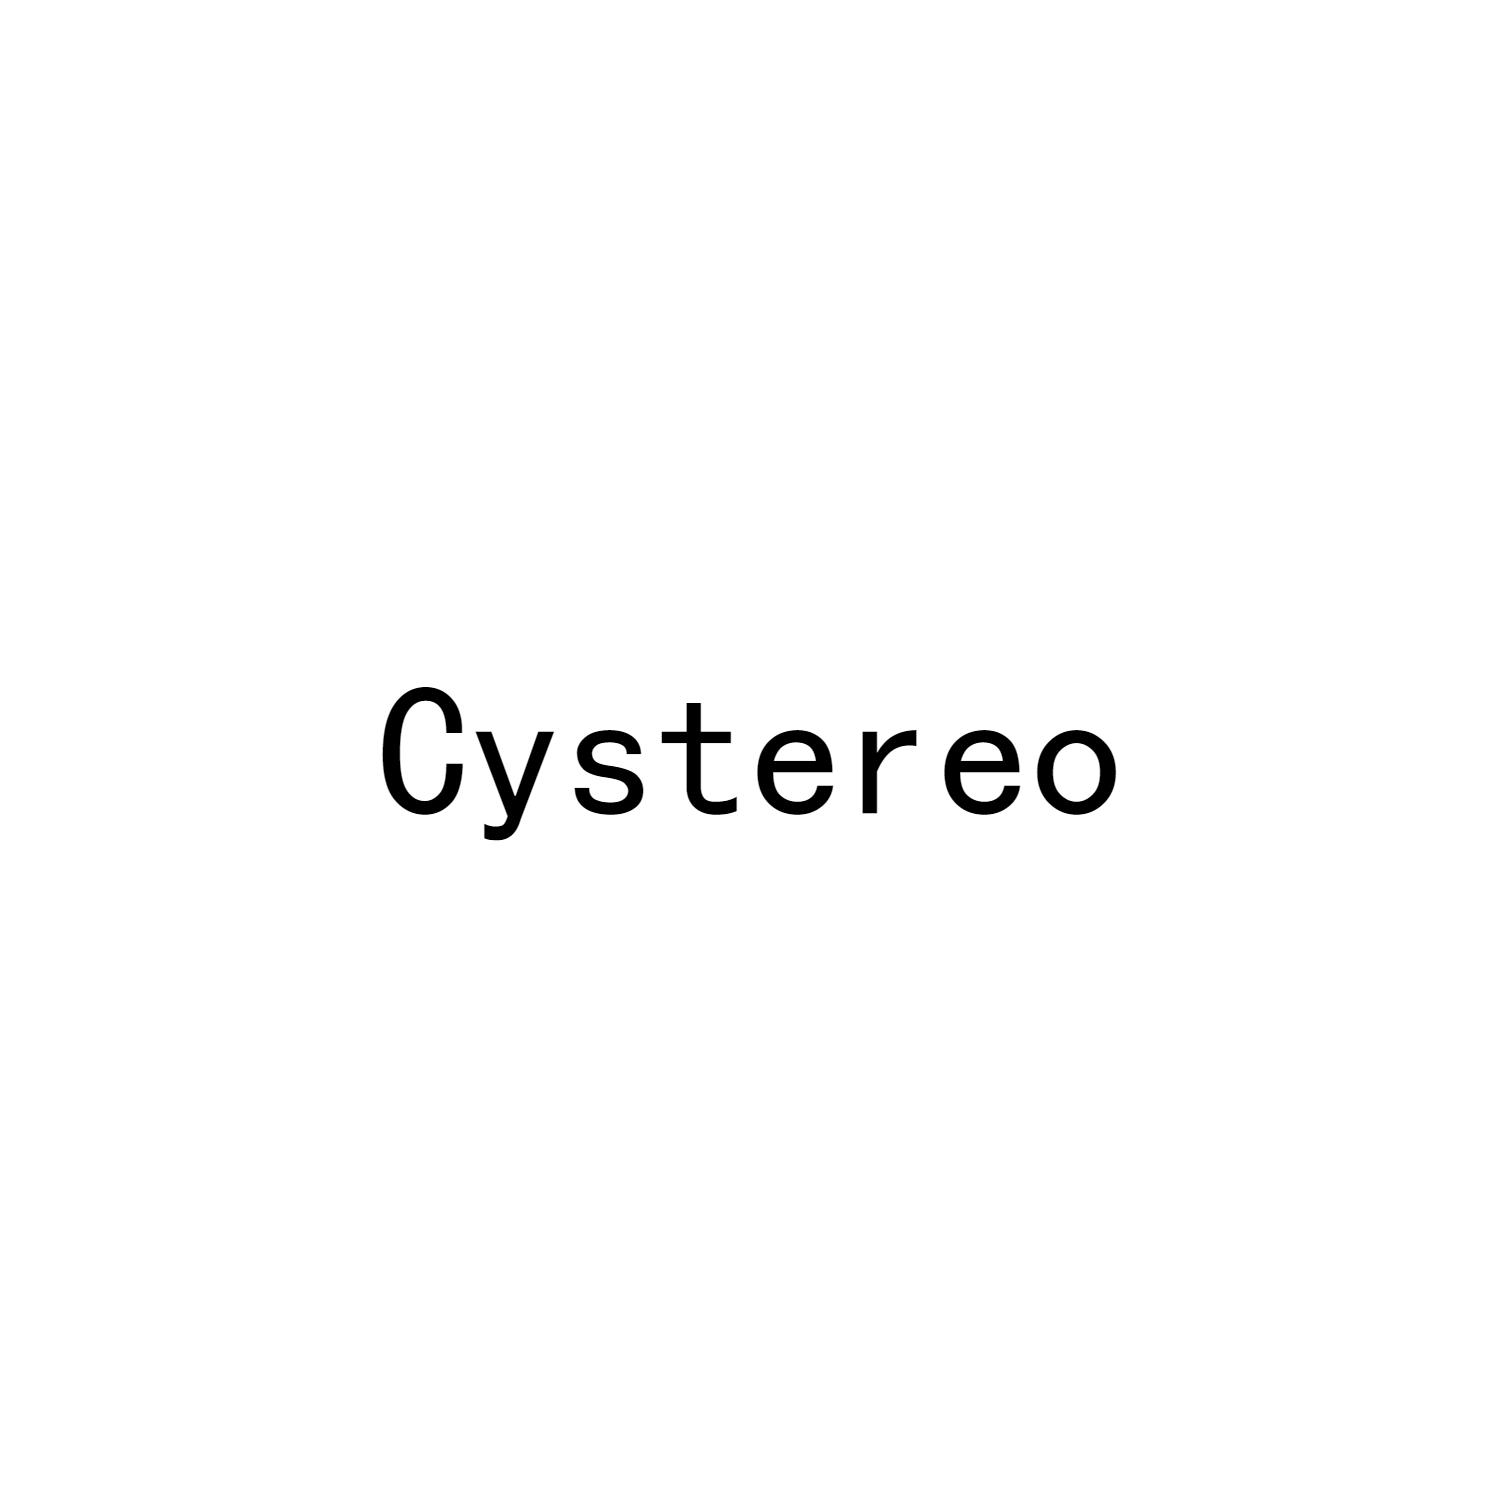 CYSTEREO